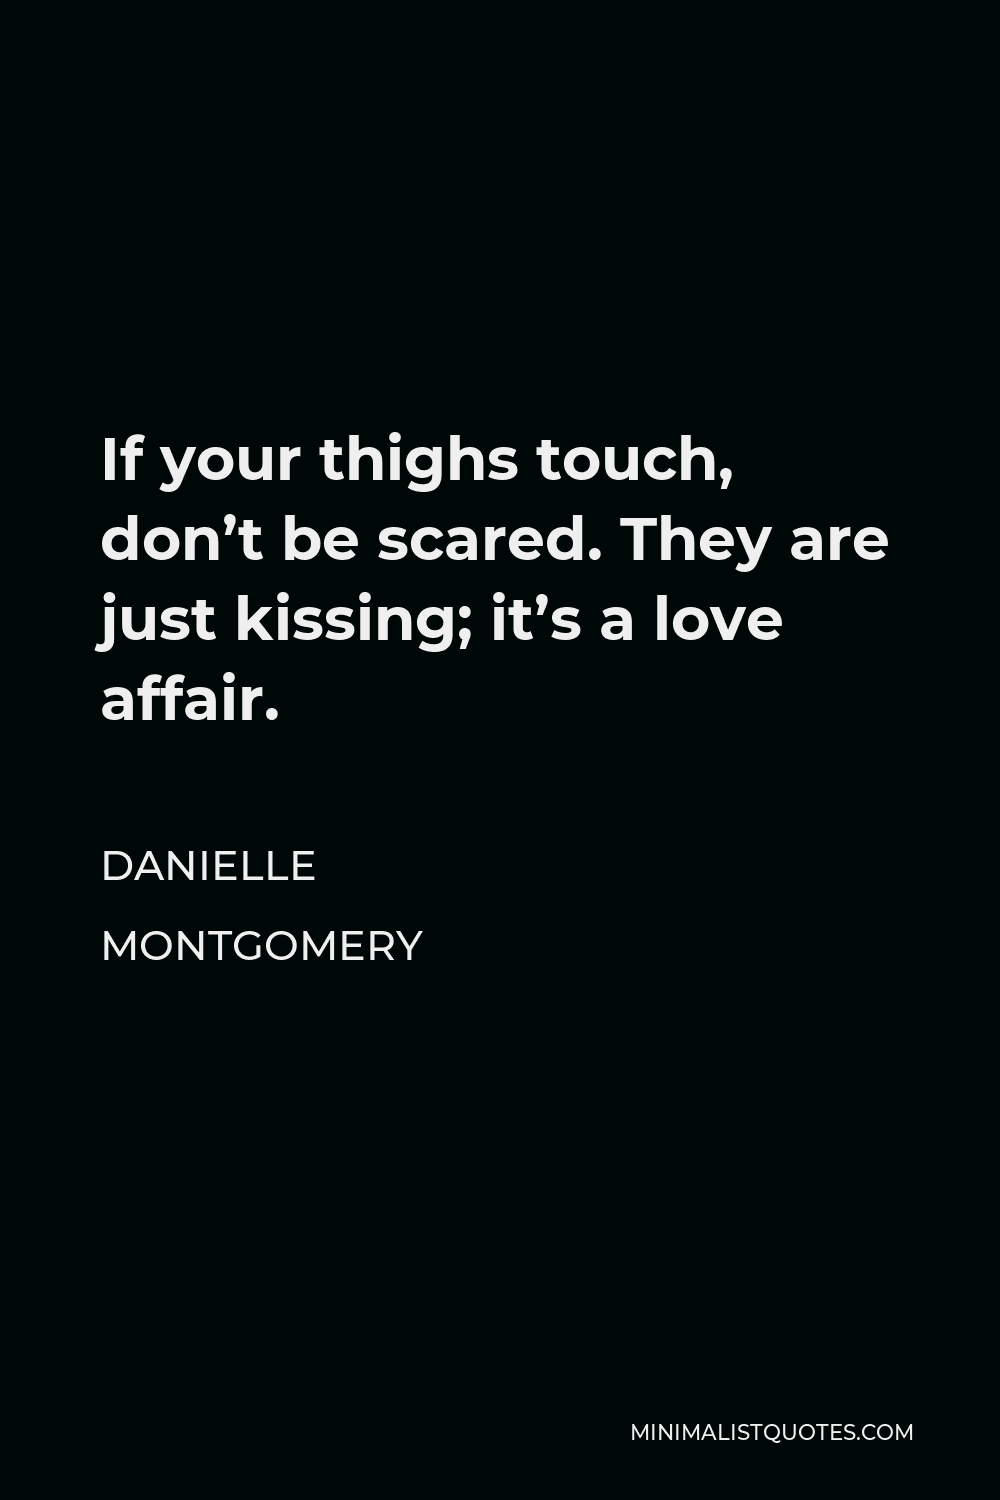 Danielle Montgomery Quote - If your thighs touch, don’t be scared. They are just kissing; it’s a love affair.